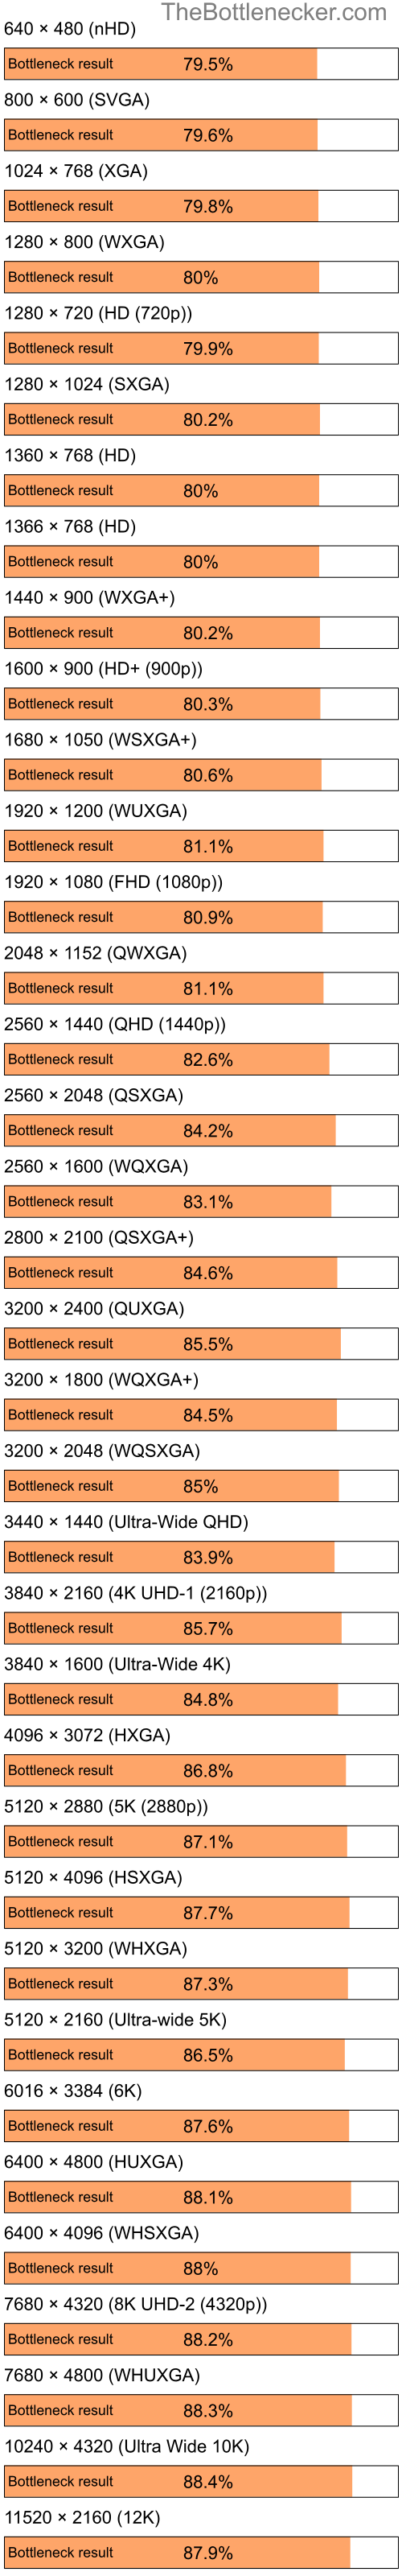 Bottleneck results by resolution for Intel Celeron M 410 and NVIDIA GeForce FX 5700 in Graphic Card Intense Tasks